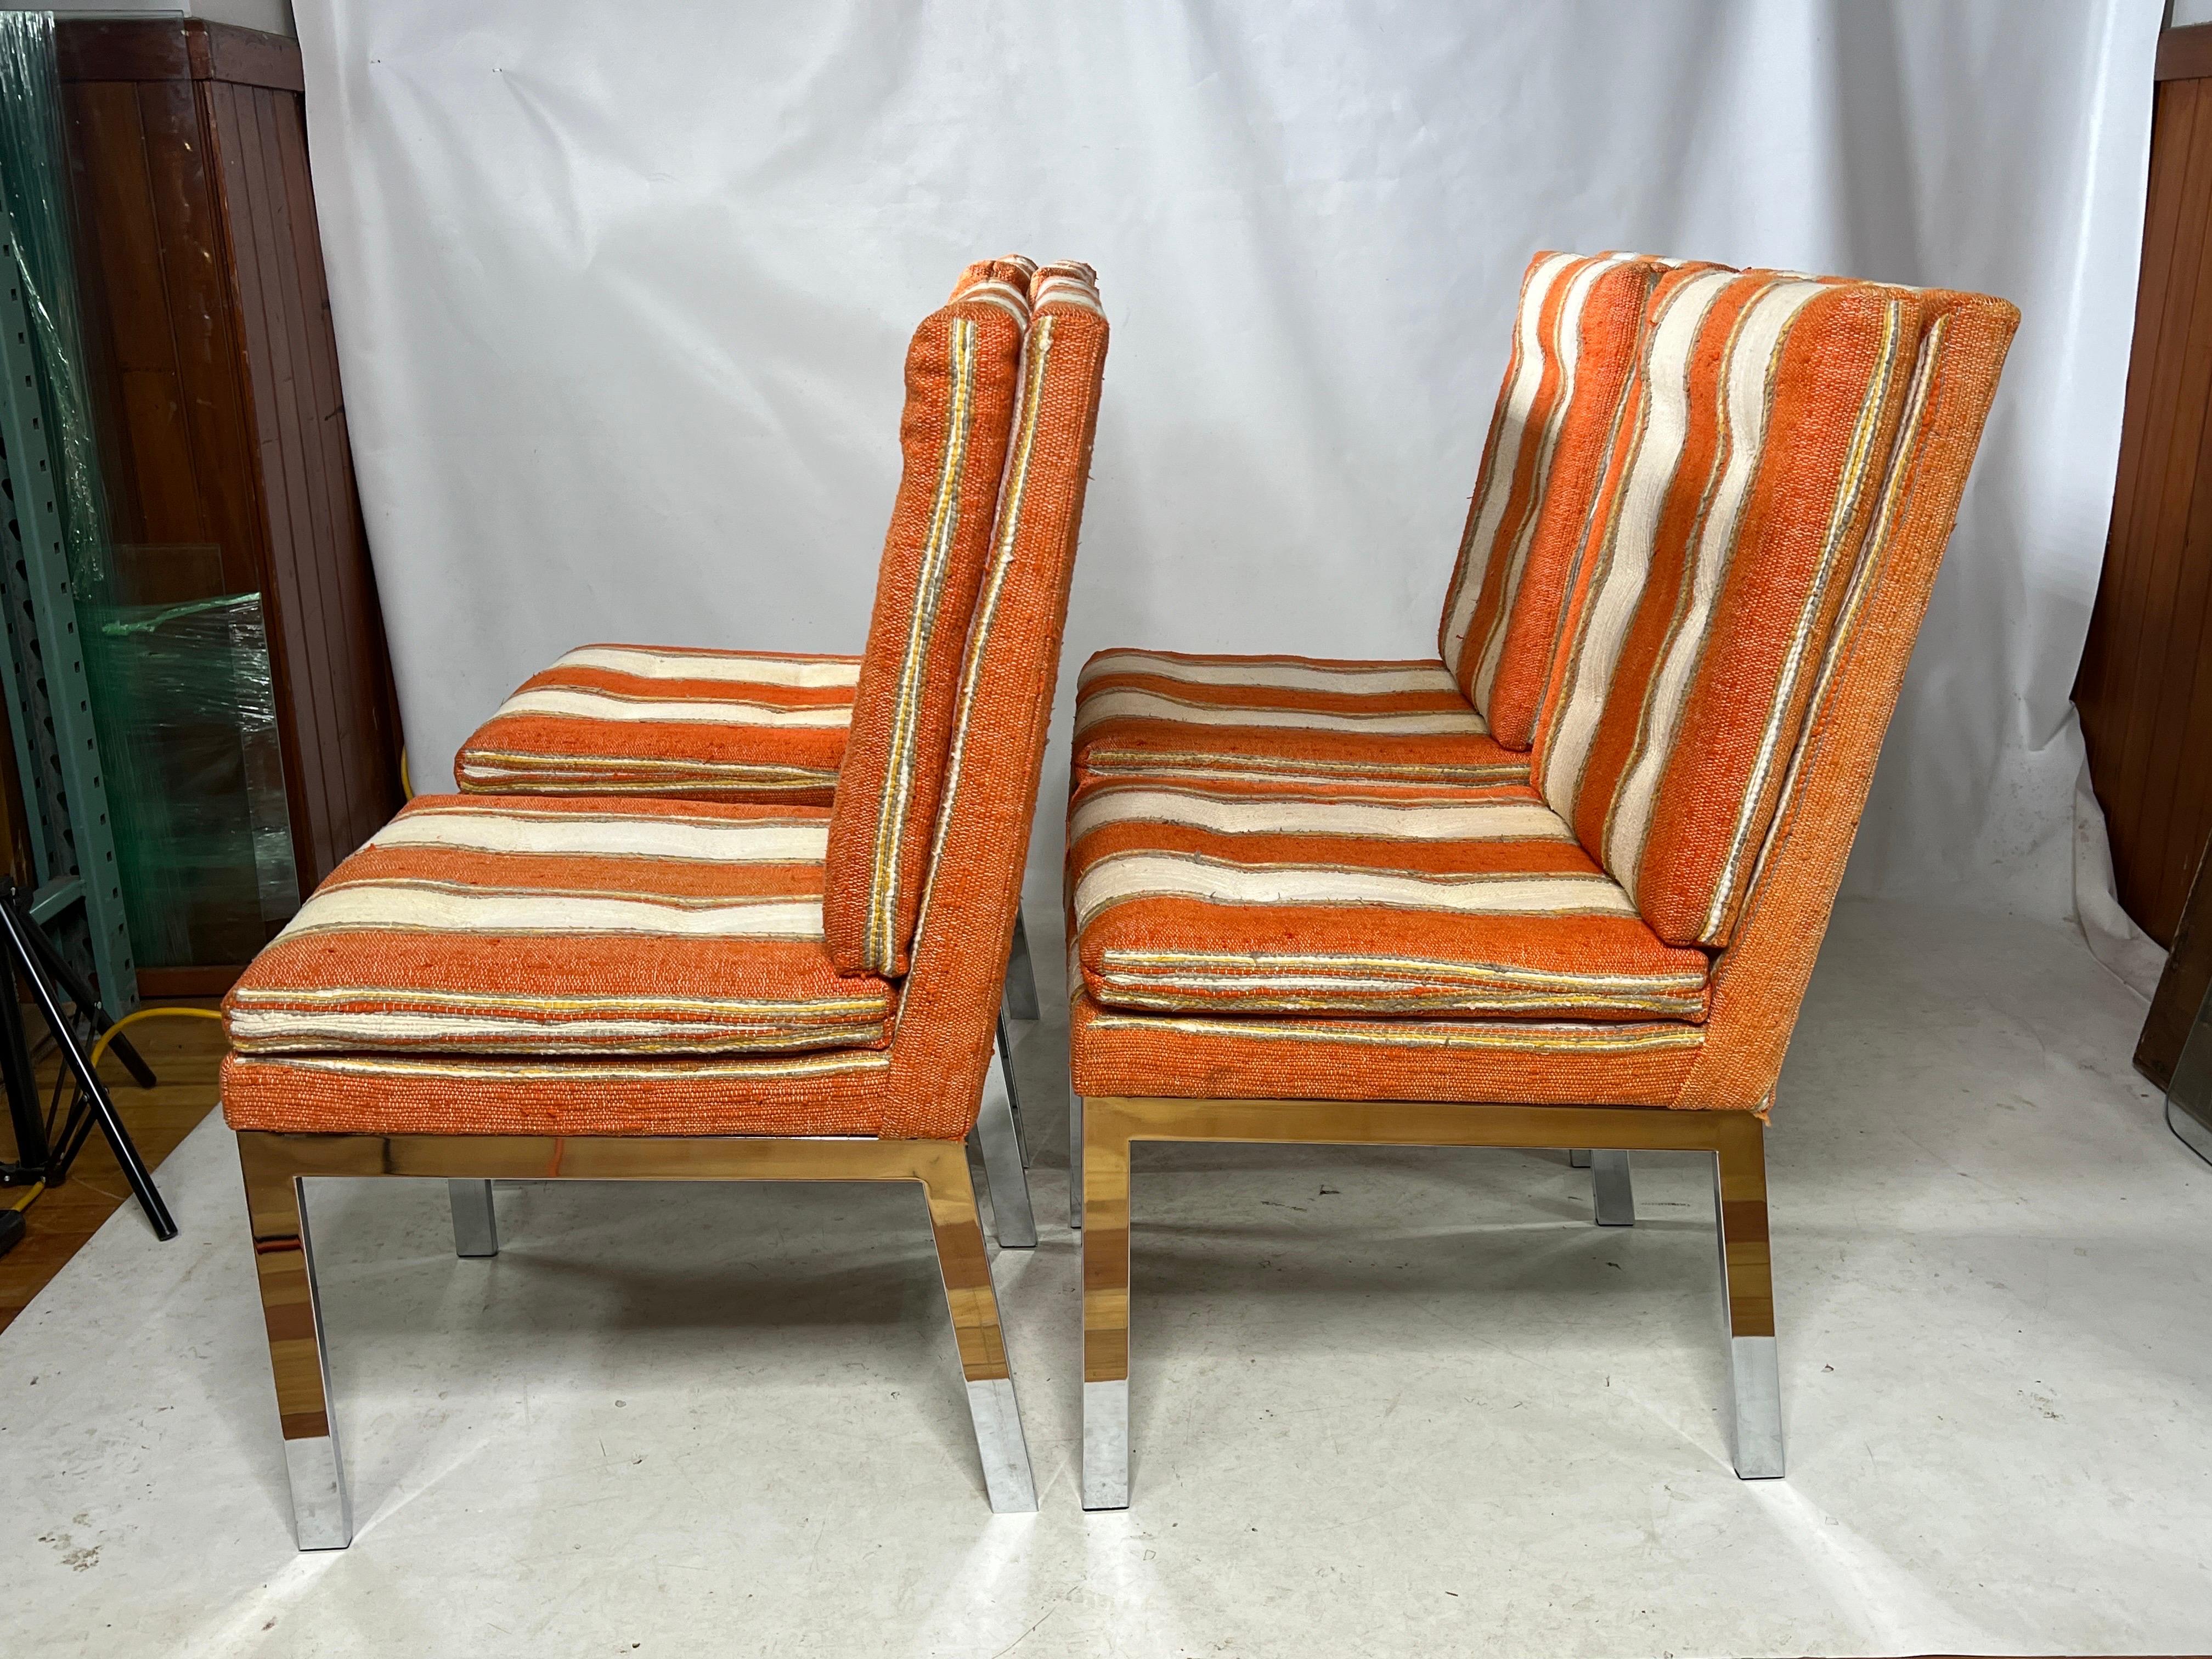 Introducing a fantastic set of four vintage Parsons dining chairs that exude both style and quality. These chairs are not only highly fashionable but also impeccably crafted